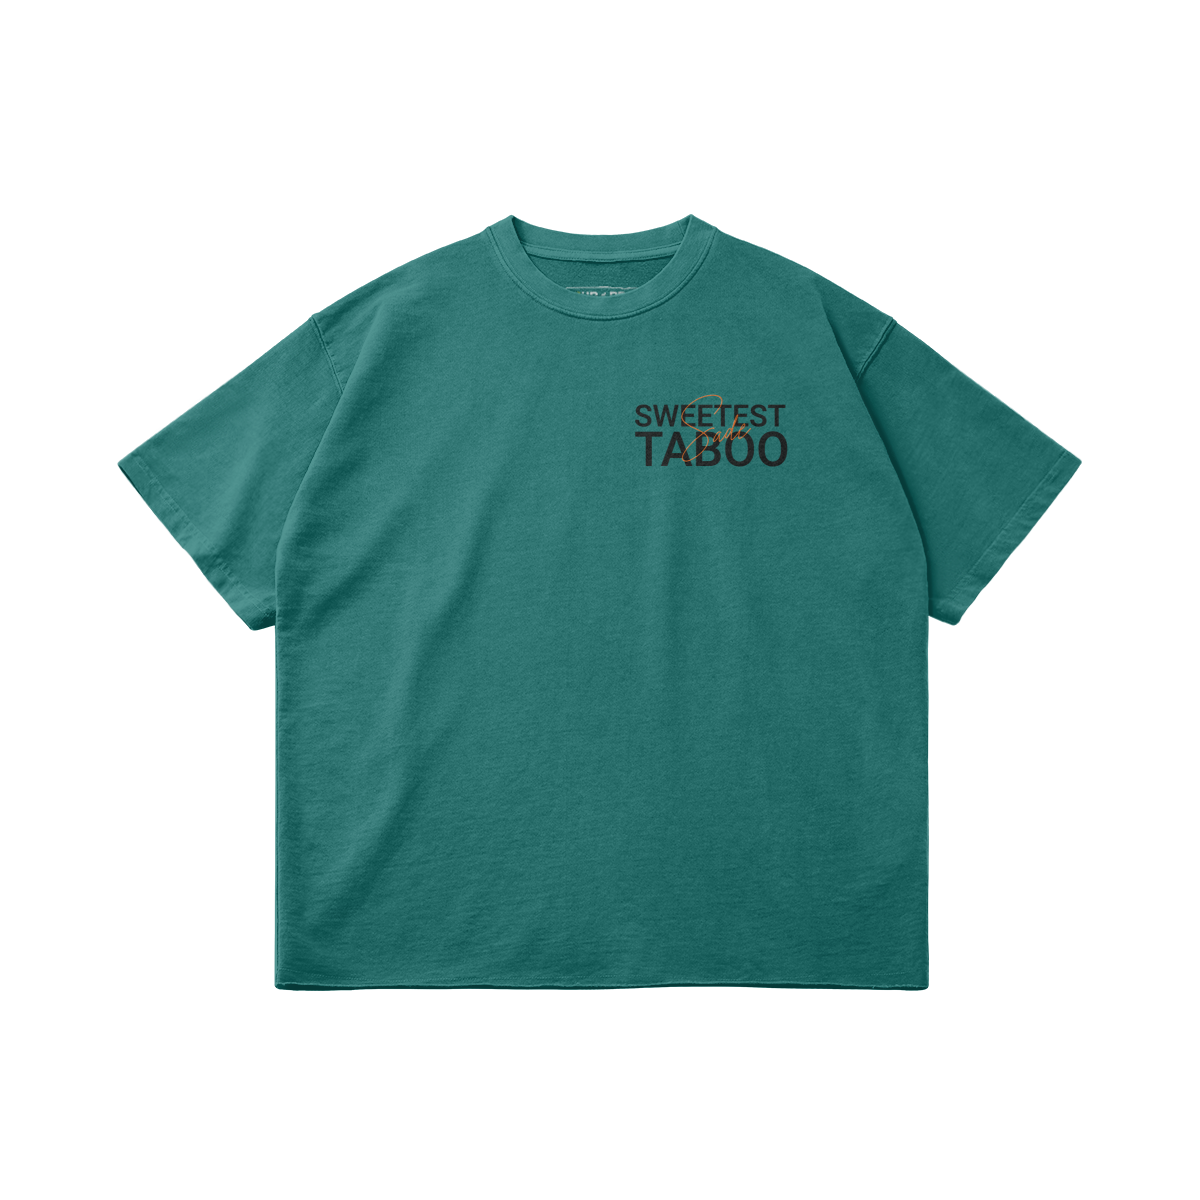 The Sweetest Taboo Oversized T-shirt